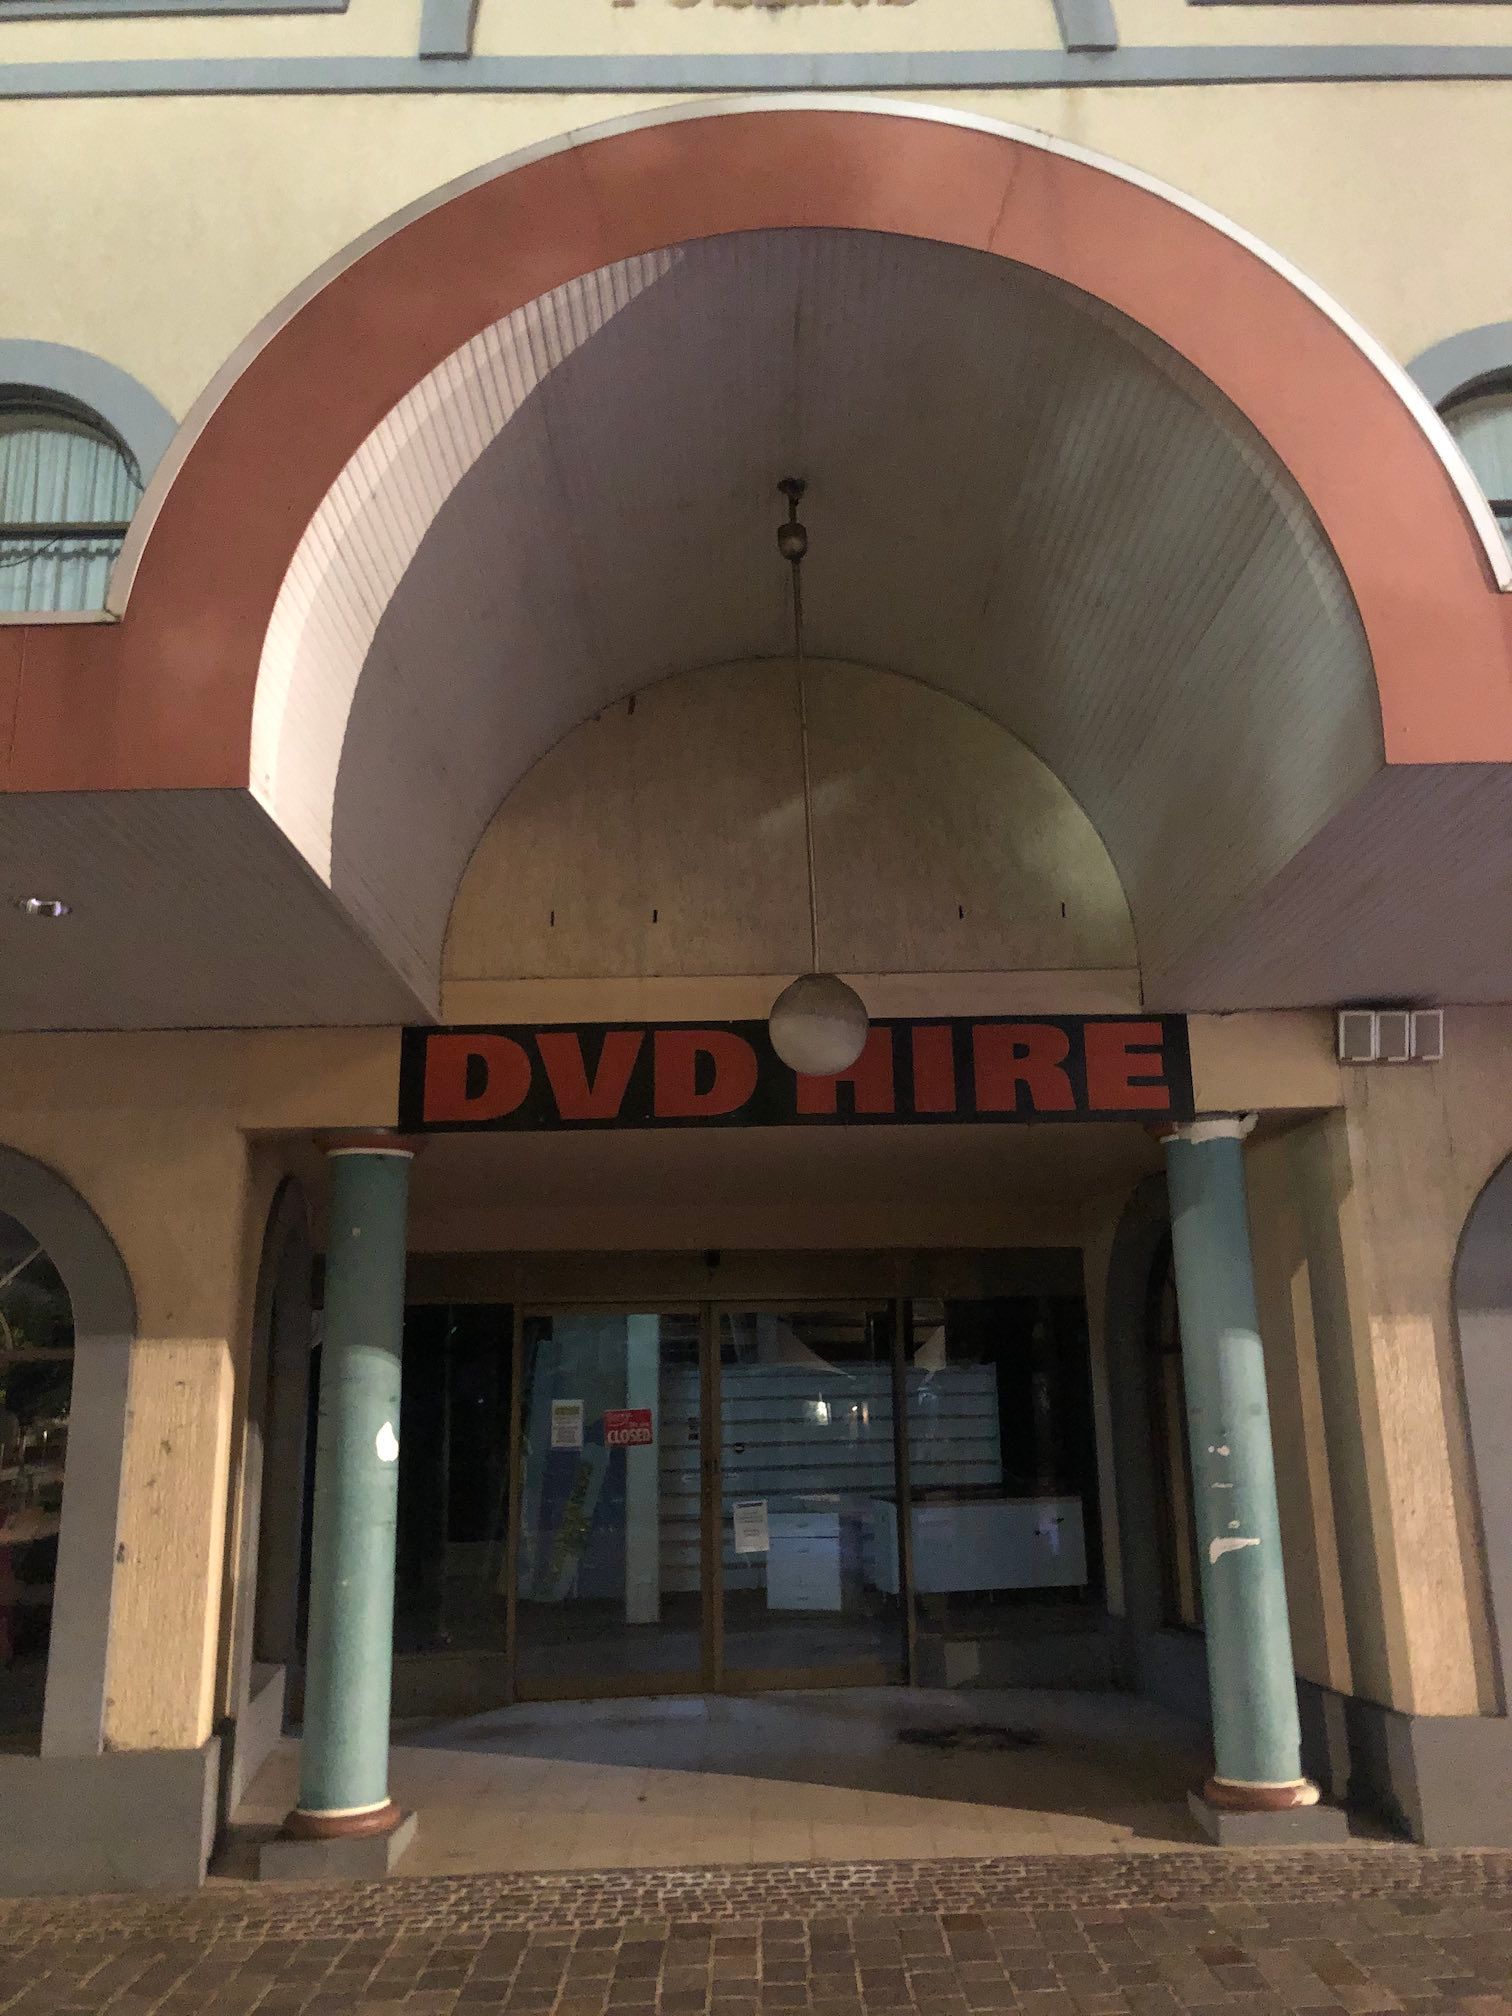 Ex-DVD Hire shop, now for lease, with columns and oversized arch above entrance.